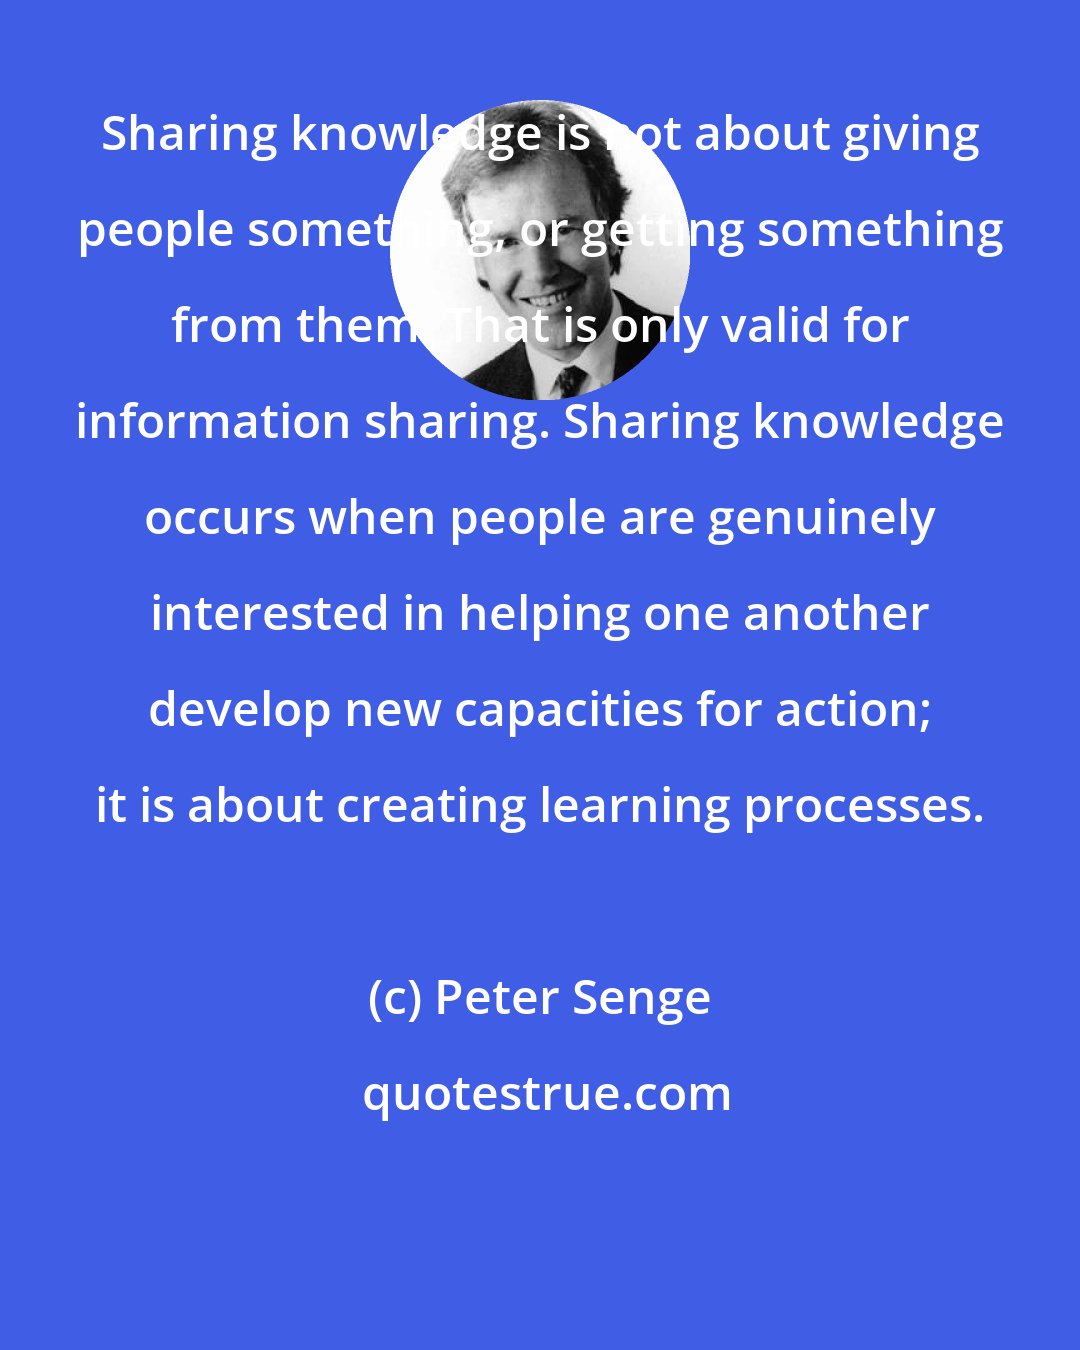 Peter Senge: Sharing knowledge is not about giving people something, or getting something from them. That is only valid for information sharing. Sharing knowledge occurs when people are genuinely interested in helping one another develop new capacities for action; it is about creating learning processes.